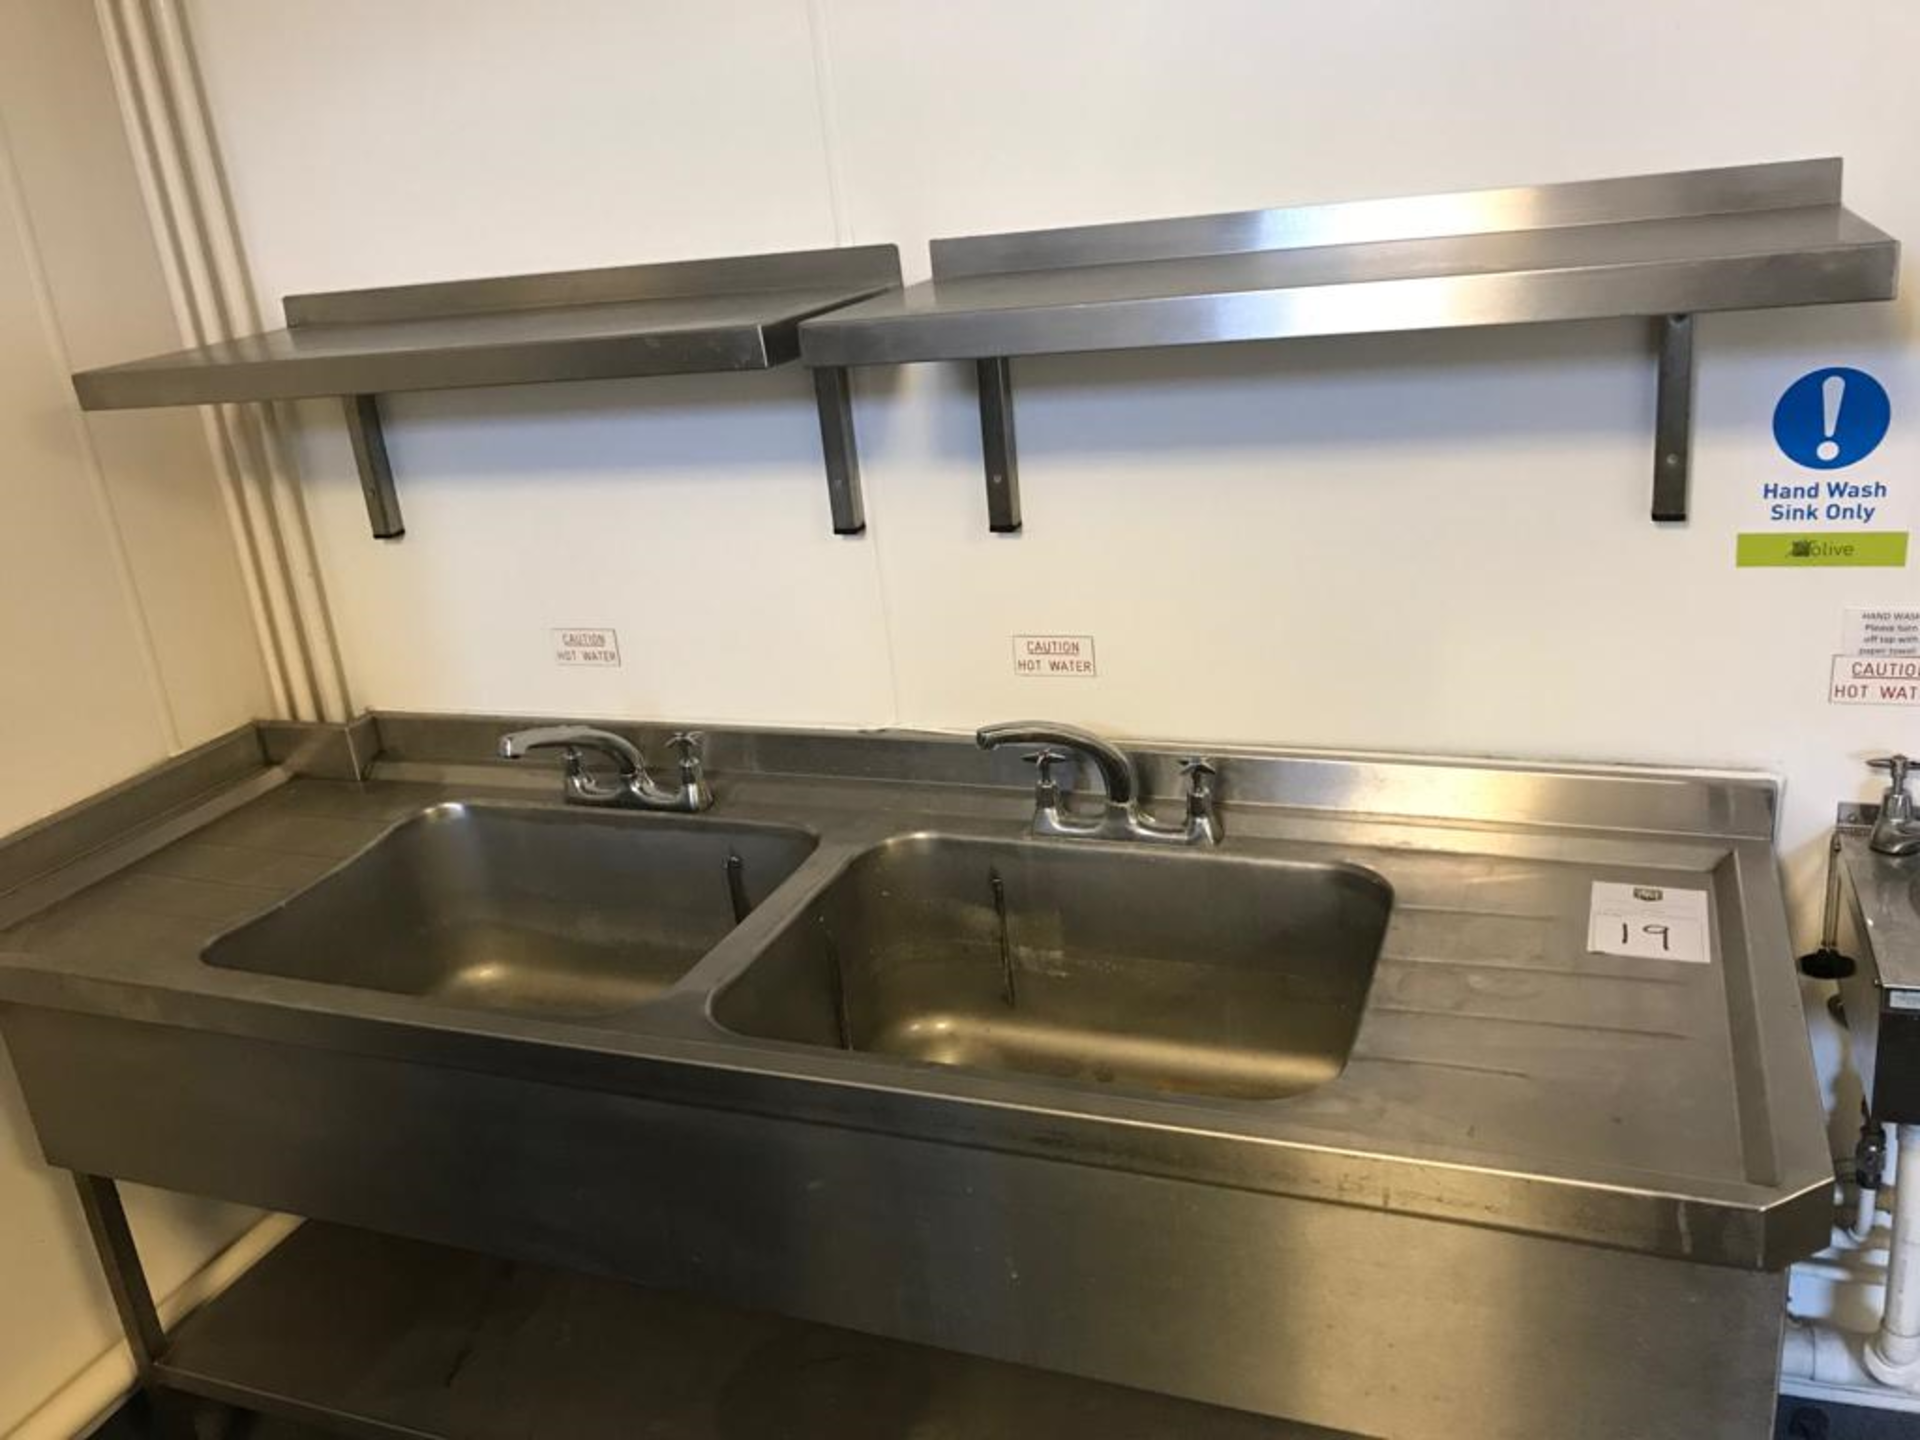 Stainless Steel Double Sink With 2 Taps, Shelf Below and 2 Wall Mounted Shelves - Image 7 of 8